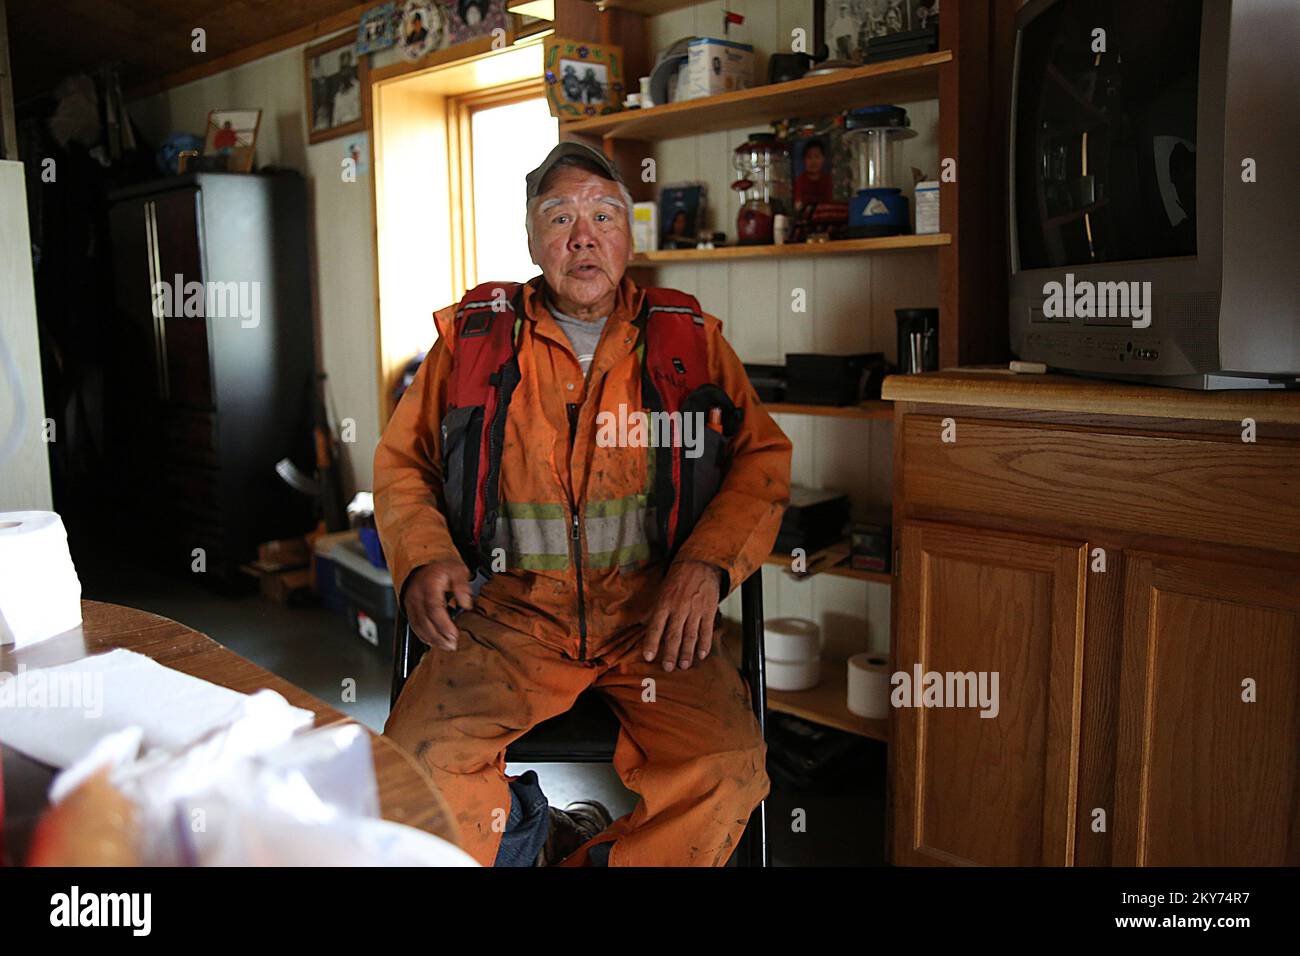 Hughes, Alaska, July 7, 2013   Disaster survivor Ralph Williams sits at his kitchen table while providing some narative regarding the losses caused from a severe flooding event along the Koyukuk riparian corridor. Individuals and business owners who sustained losses in the designated area can begin applying for assistance by registering at www.disasterassistance.gov or by calling 1-800-621-FEMA (3362). Adam Dubrowa/ FEMA.. Photographs Relating to Disasters and Emergency Management Programs, Activities, and Officials Stock Photo